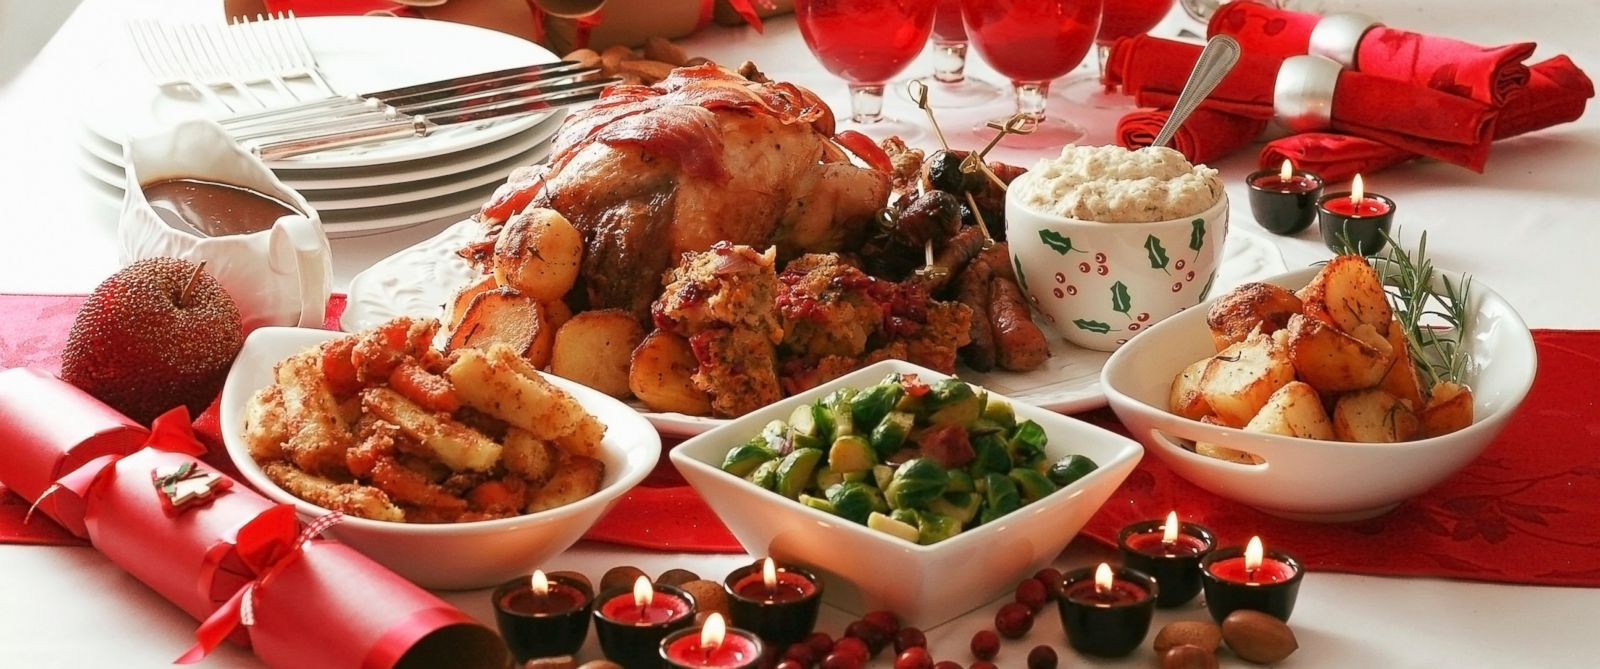 Christmas Dinner Images
 How Many Calories the Average American Eats on Christmas